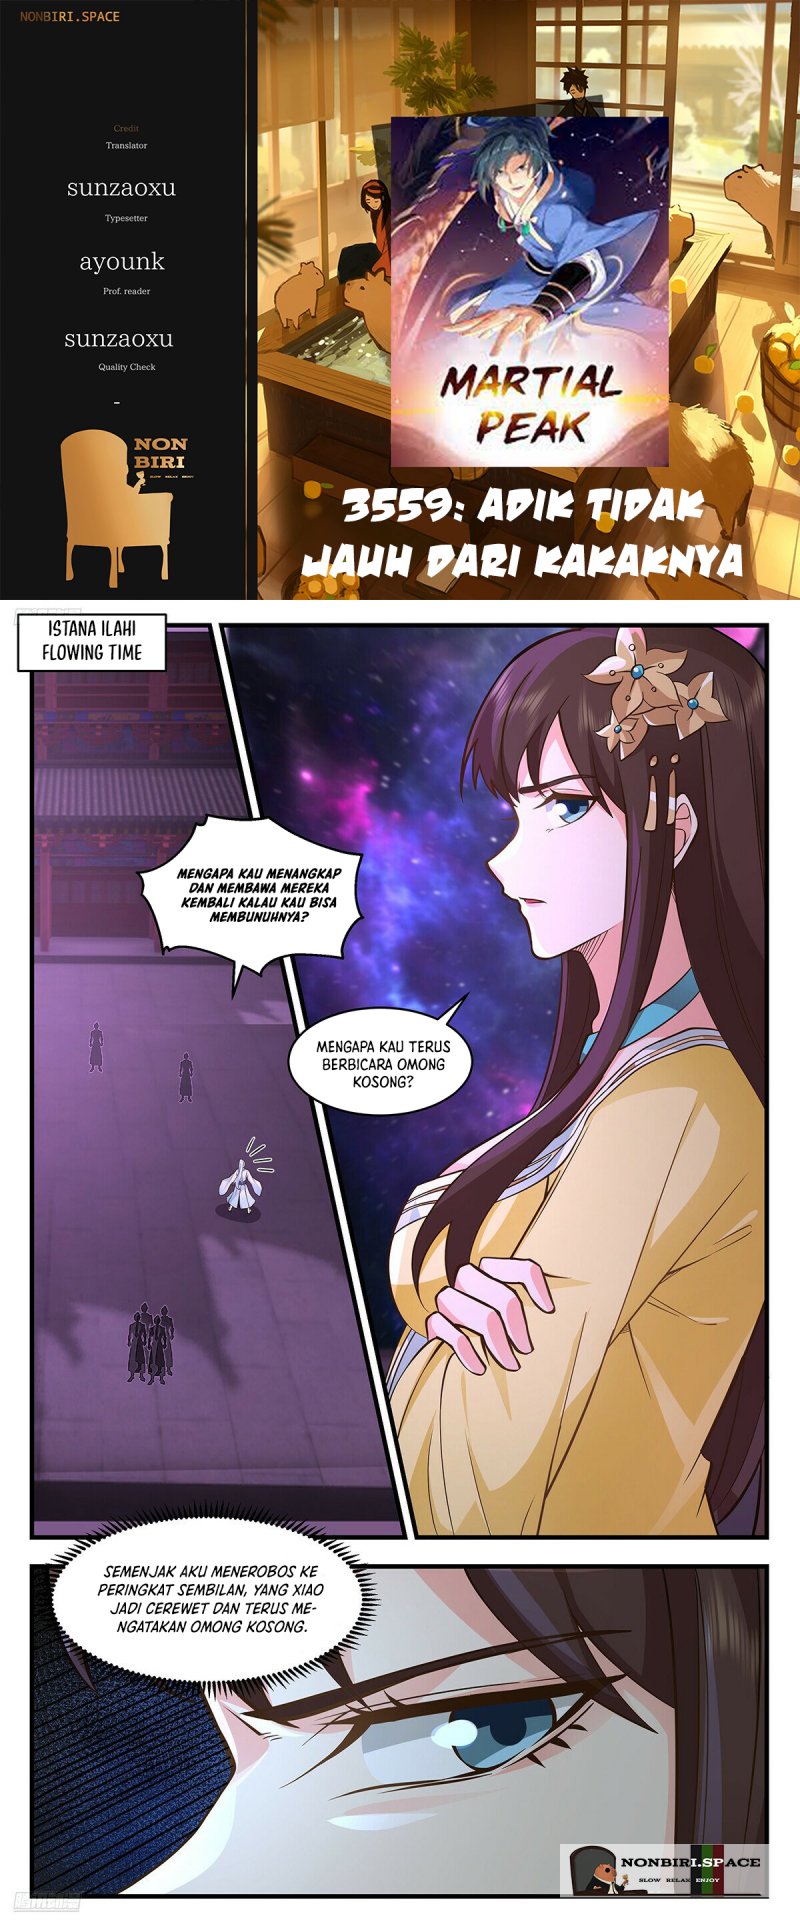 Martial Peak: Chapter 3559 - Page 1